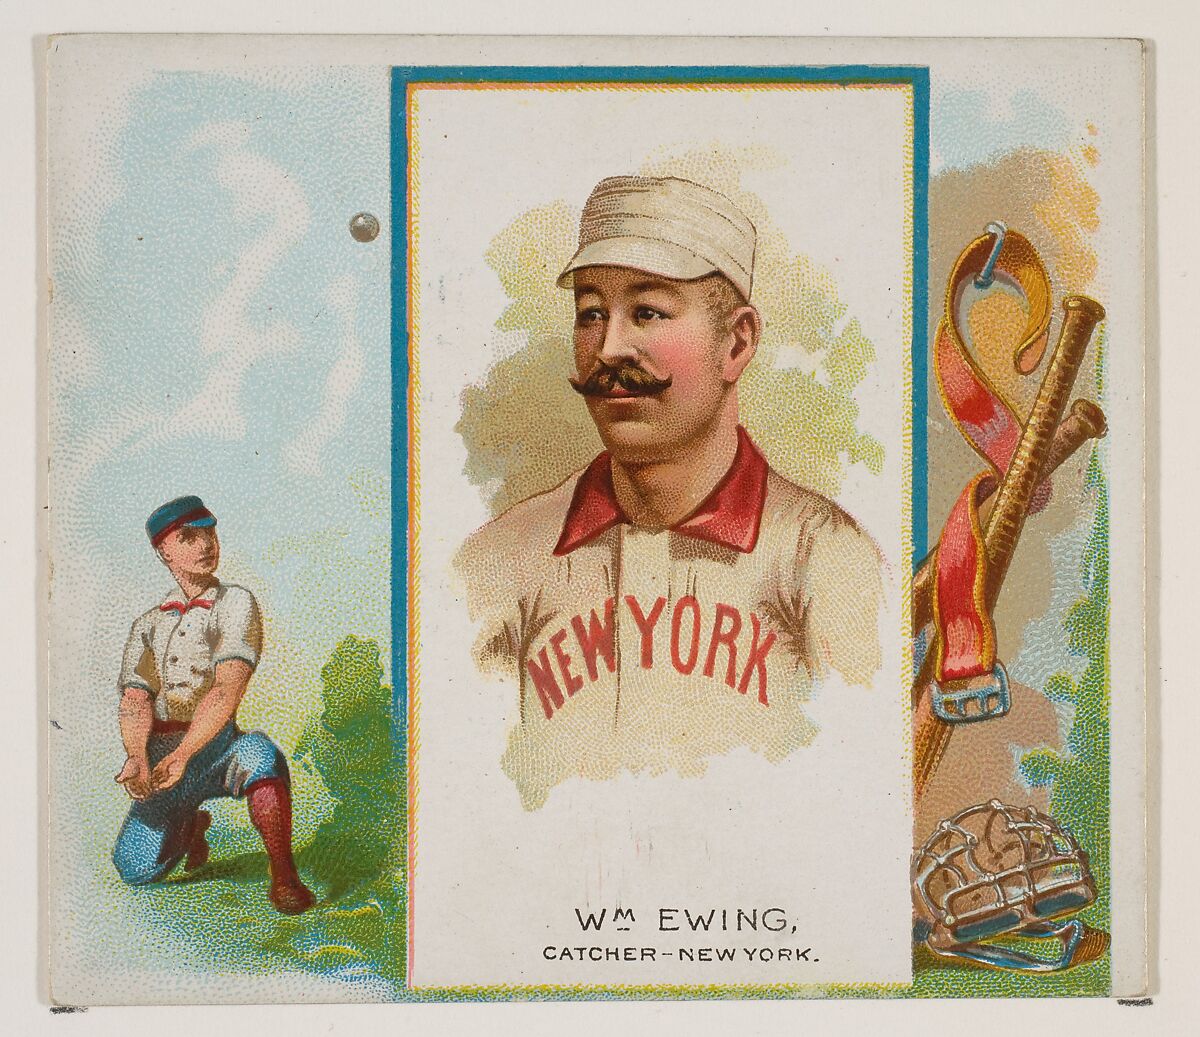 William Ewing, Catcher, New York, from World's Champions, Second Series (N43) for Allen & Ginter Cigarettes, Allen &amp; Ginter (American, Richmond, Virginia), Commercial lithograph 